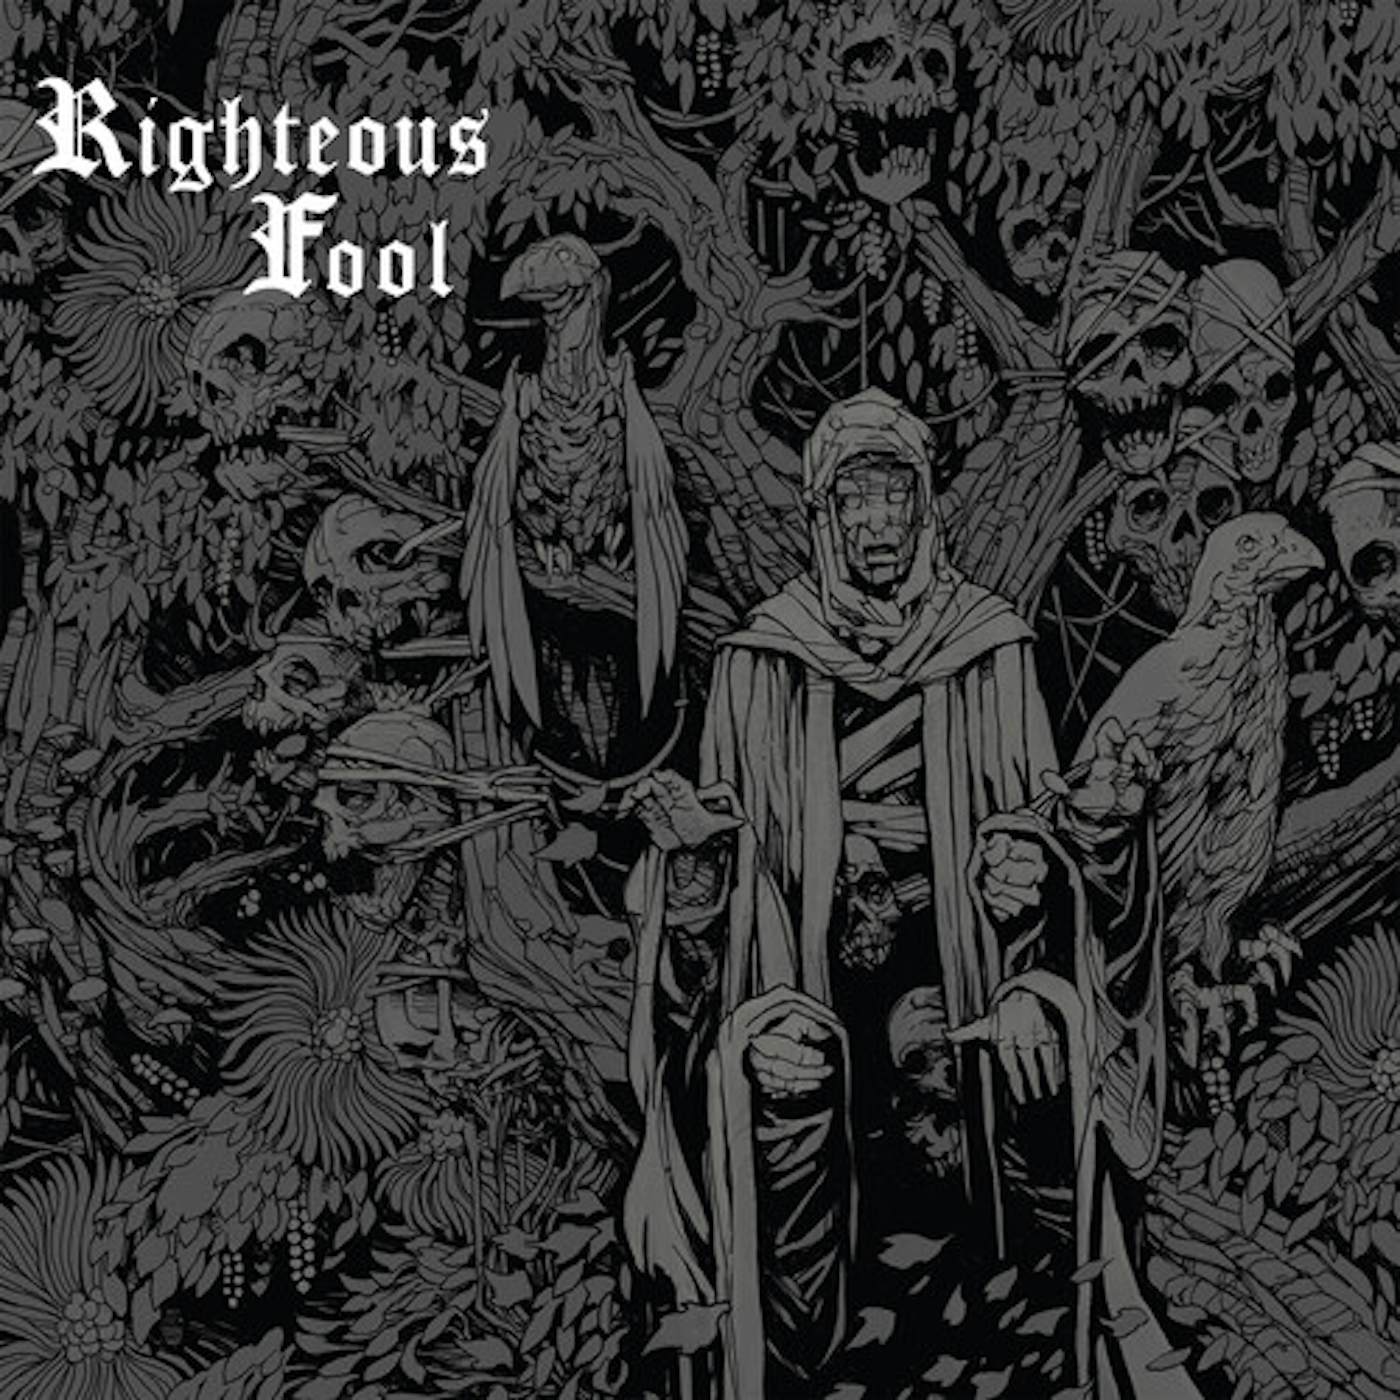 RIGHTEOUS FOOL CD